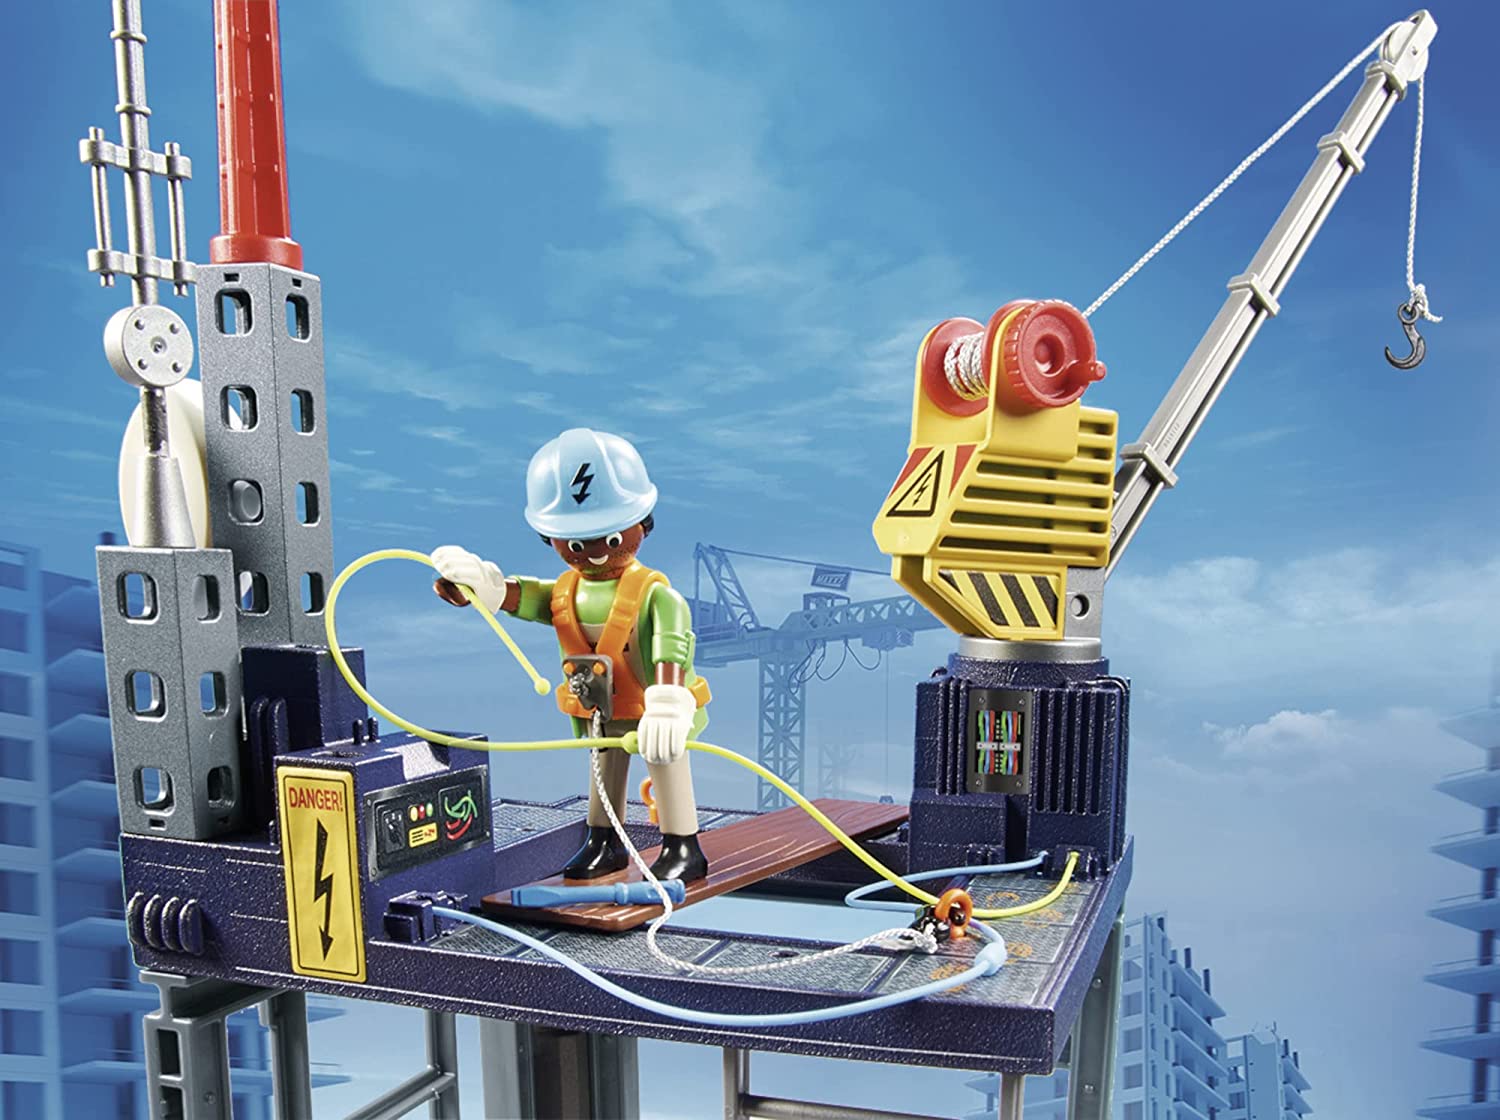 Playmobil City Action Starter Construction Site